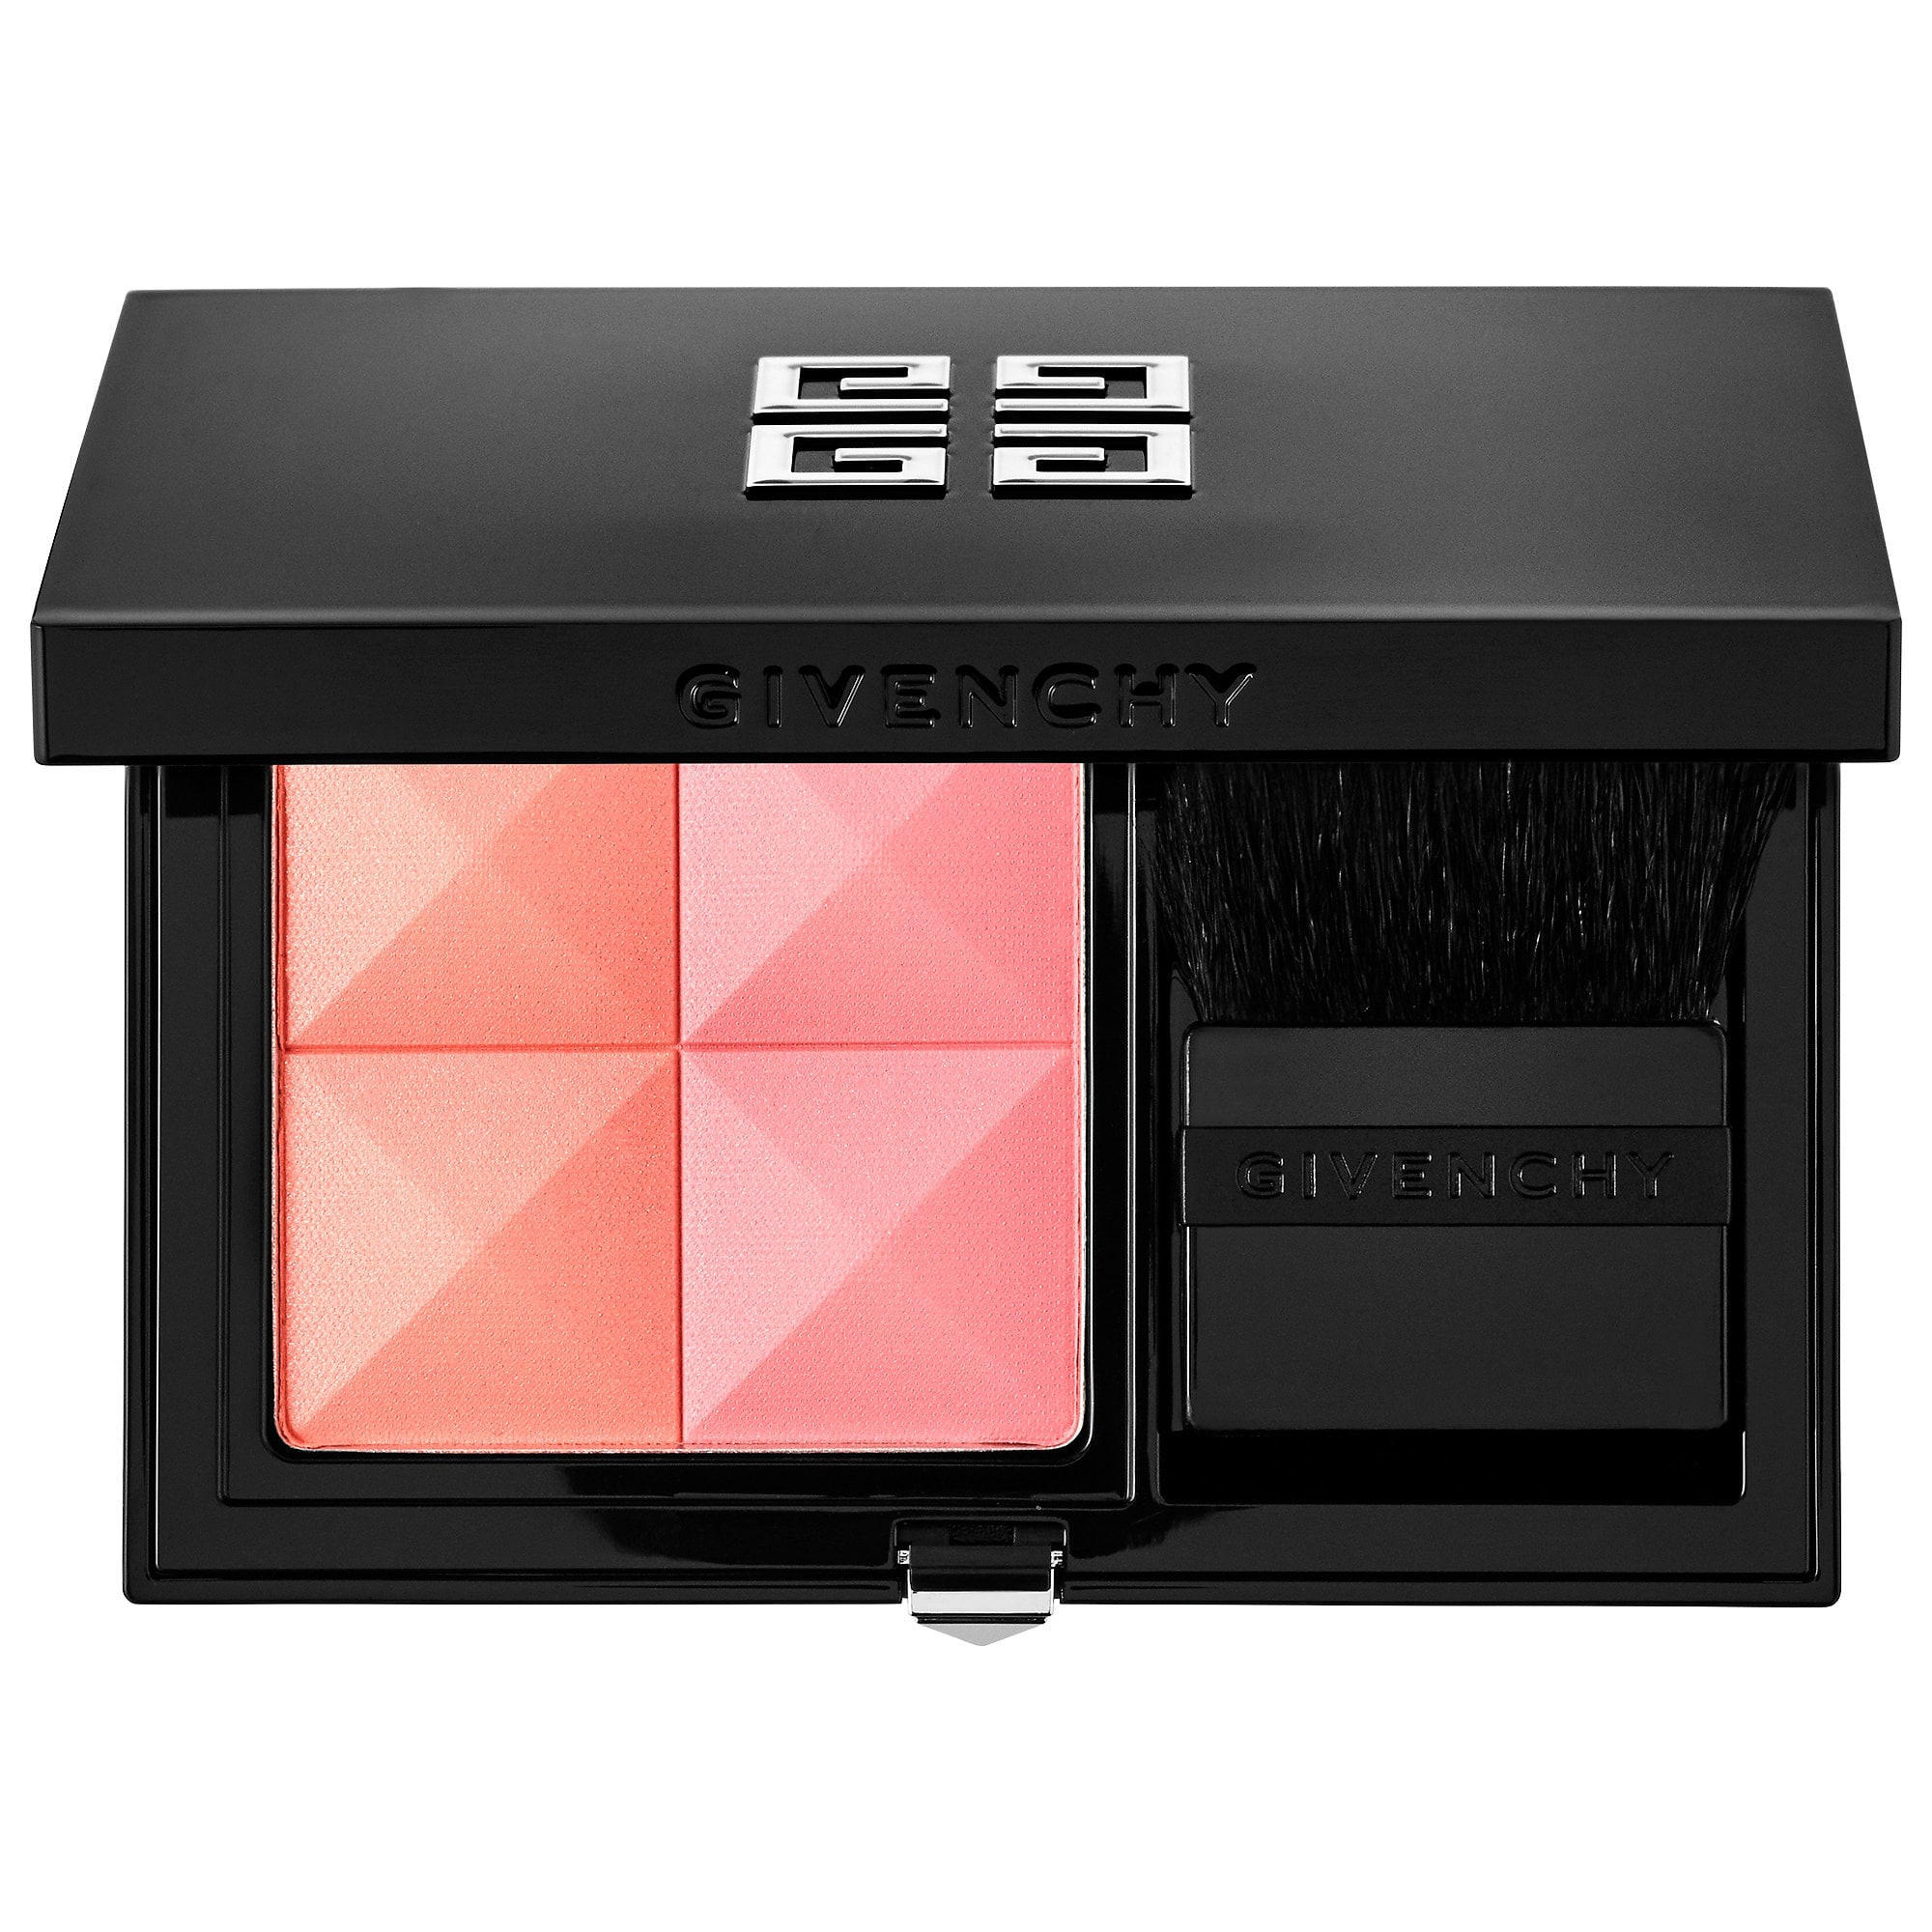 Givenchy Prisme Blush Highlight & Structure Powder Blush Duo Rite 4